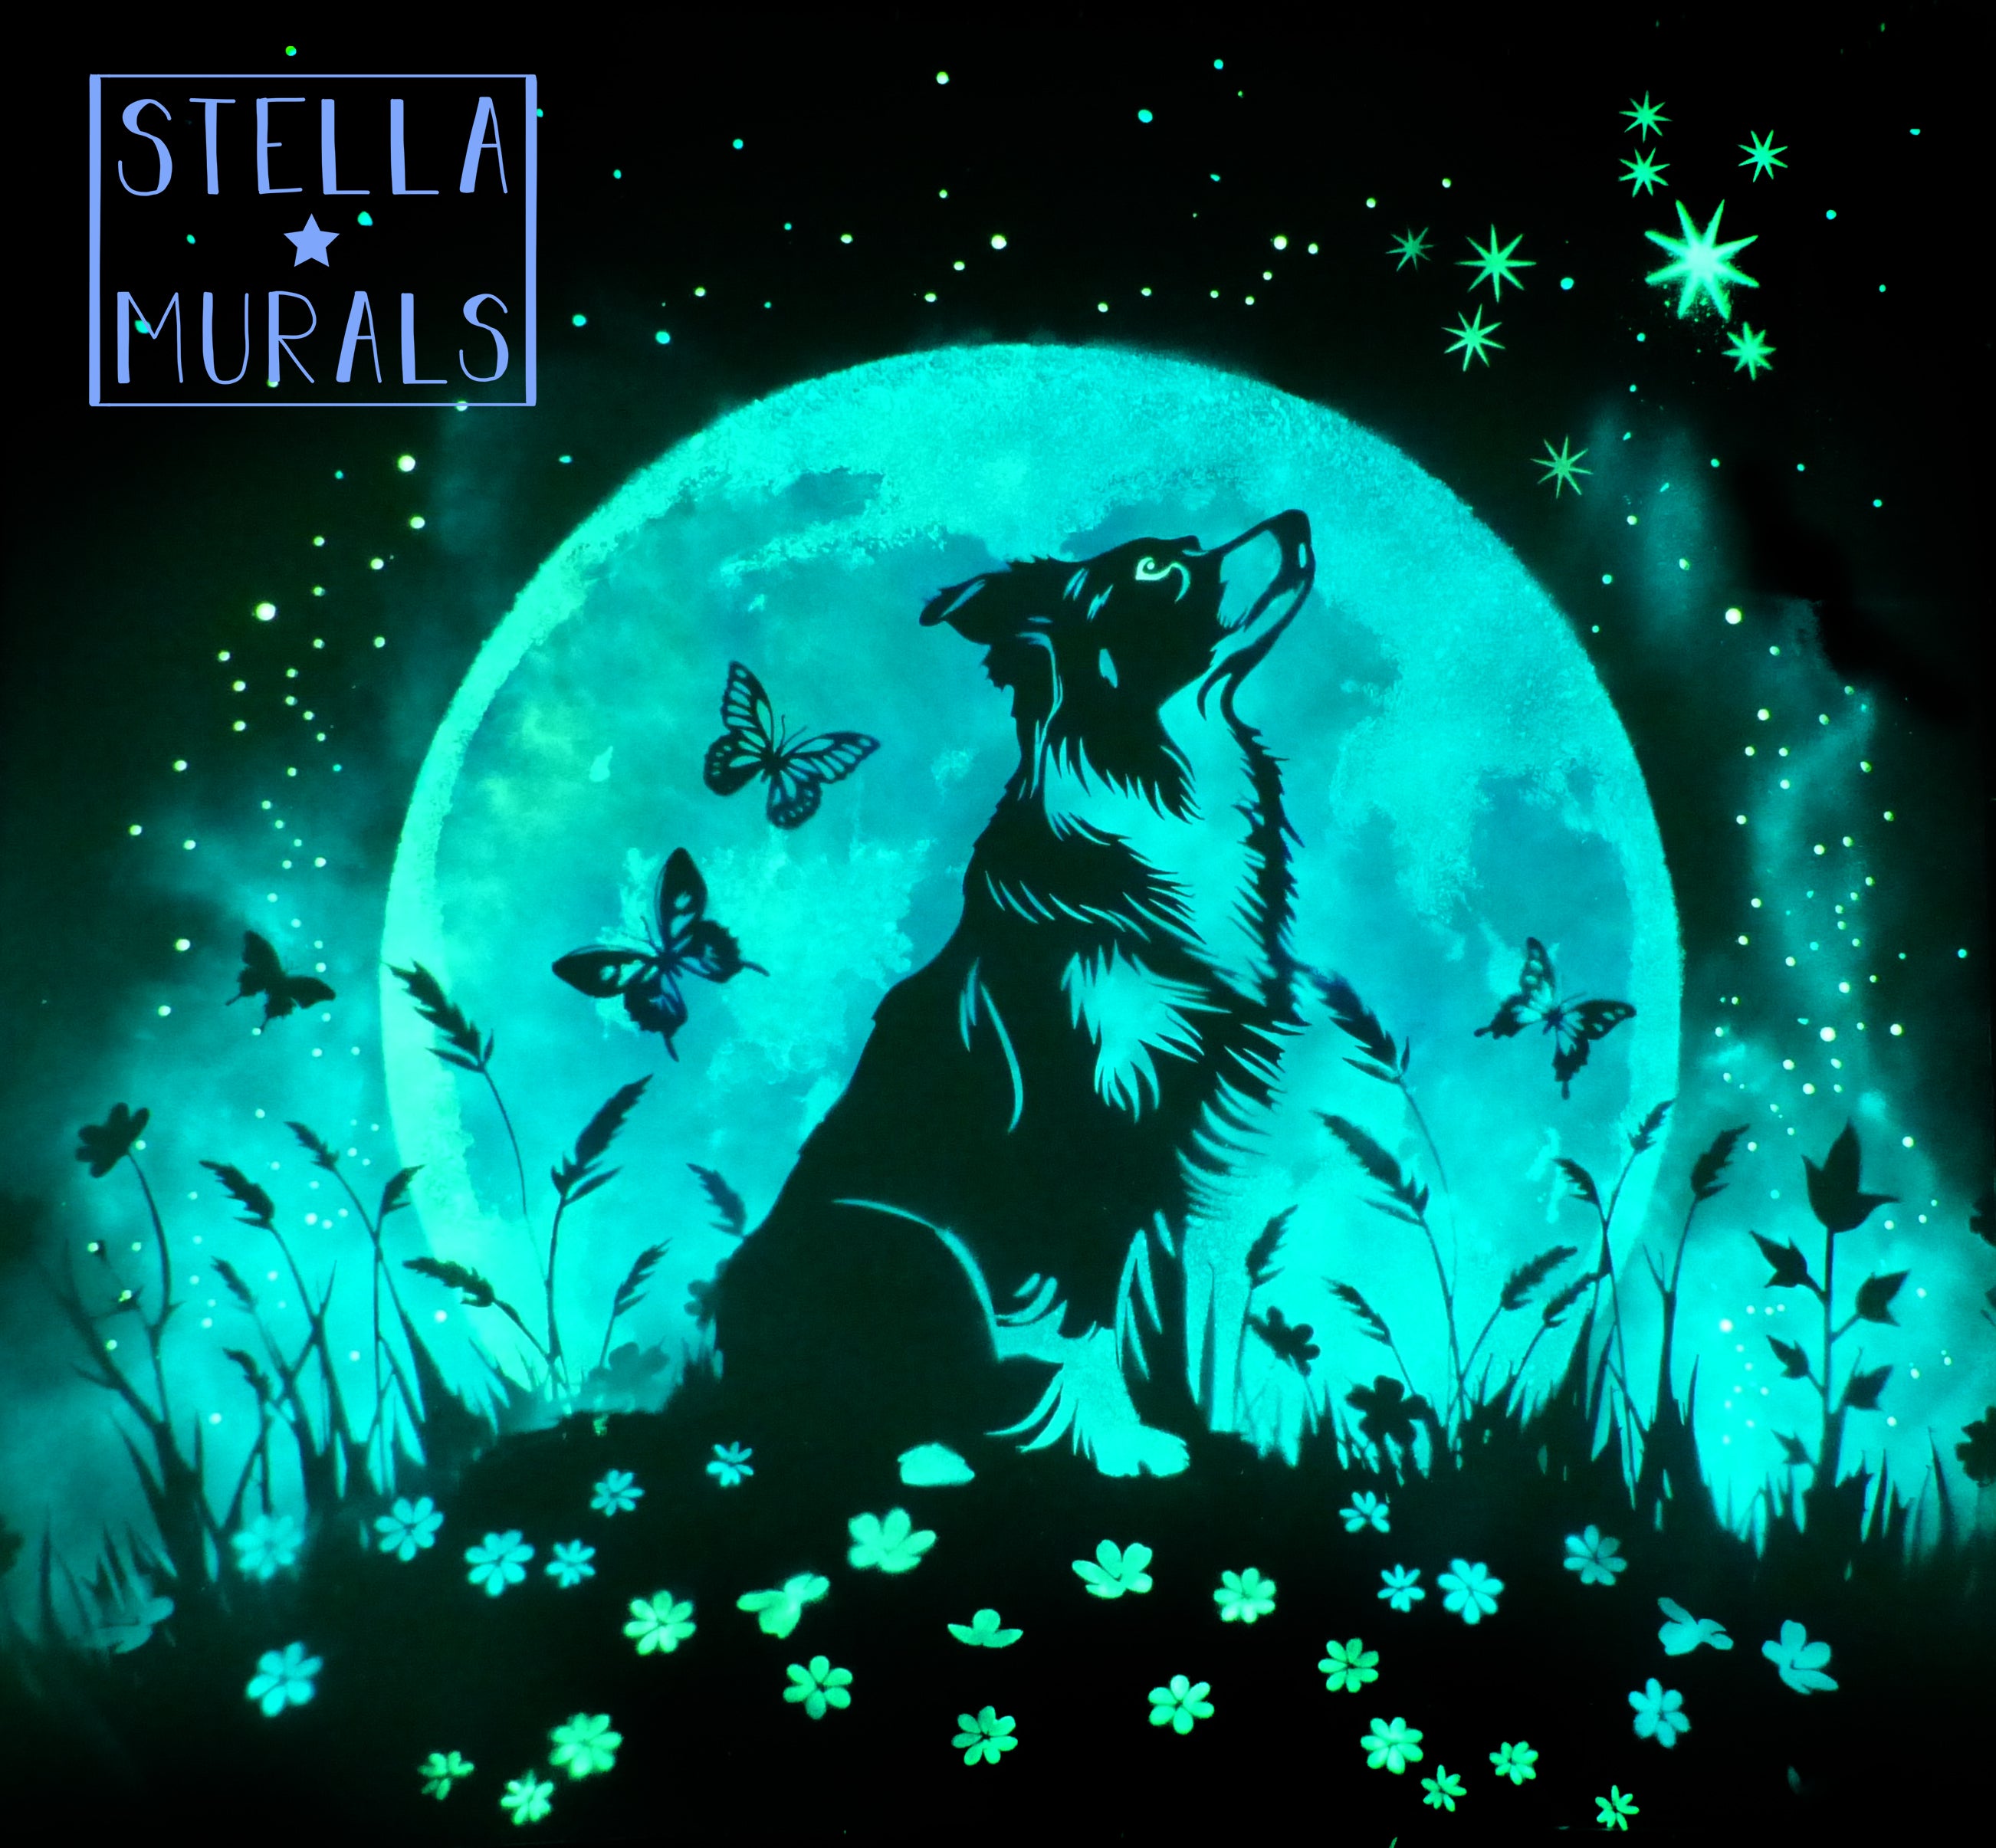 Glow in the dark mural showing sheepdog silhouetted in front of the full Moon looking up at the star constellation of Canis Major 